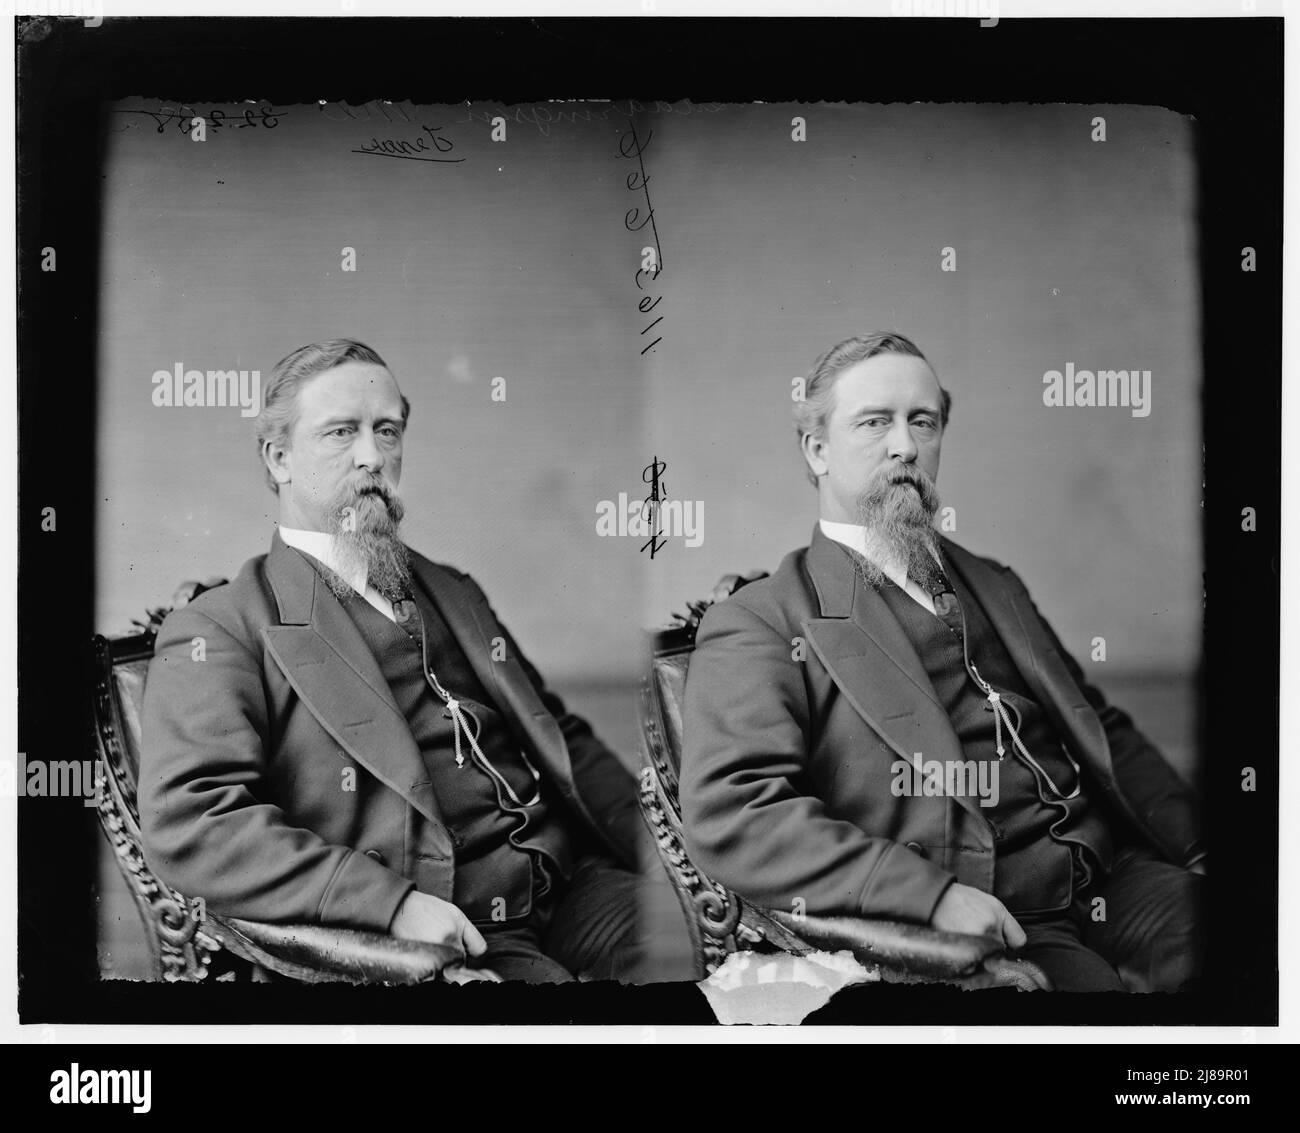 Swearinger, Hon. R.M. of Texas, not M.C. [Member of Congress?], between 1865 and 1880. Stock Photo